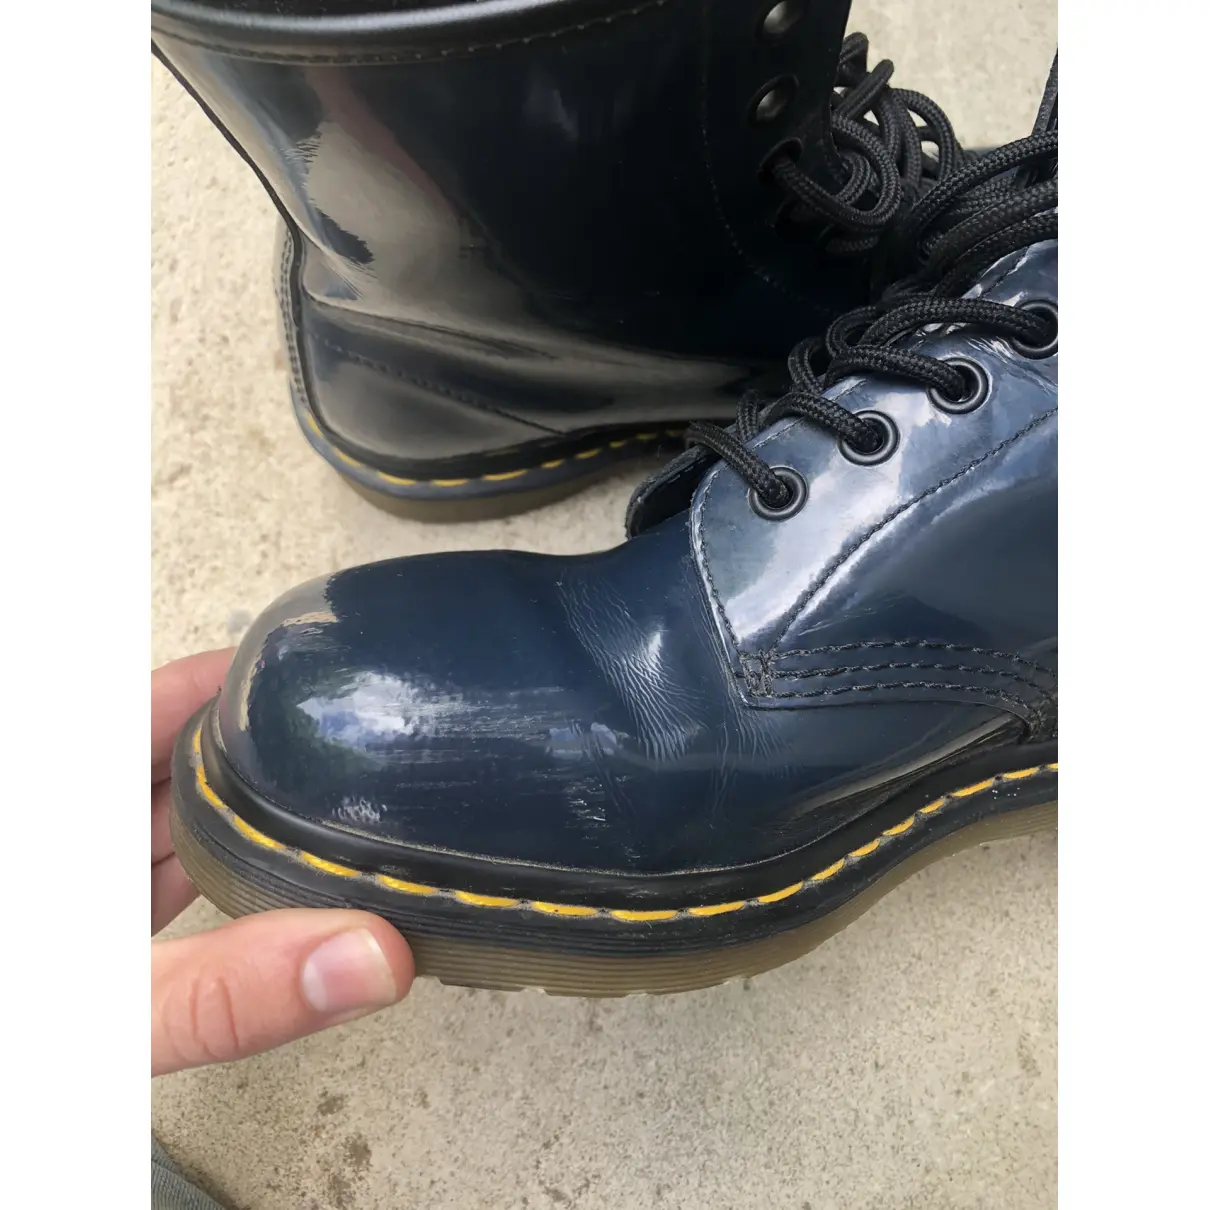 1460 Pascal (8 eye) patent leather lace up boots Dr. Martens